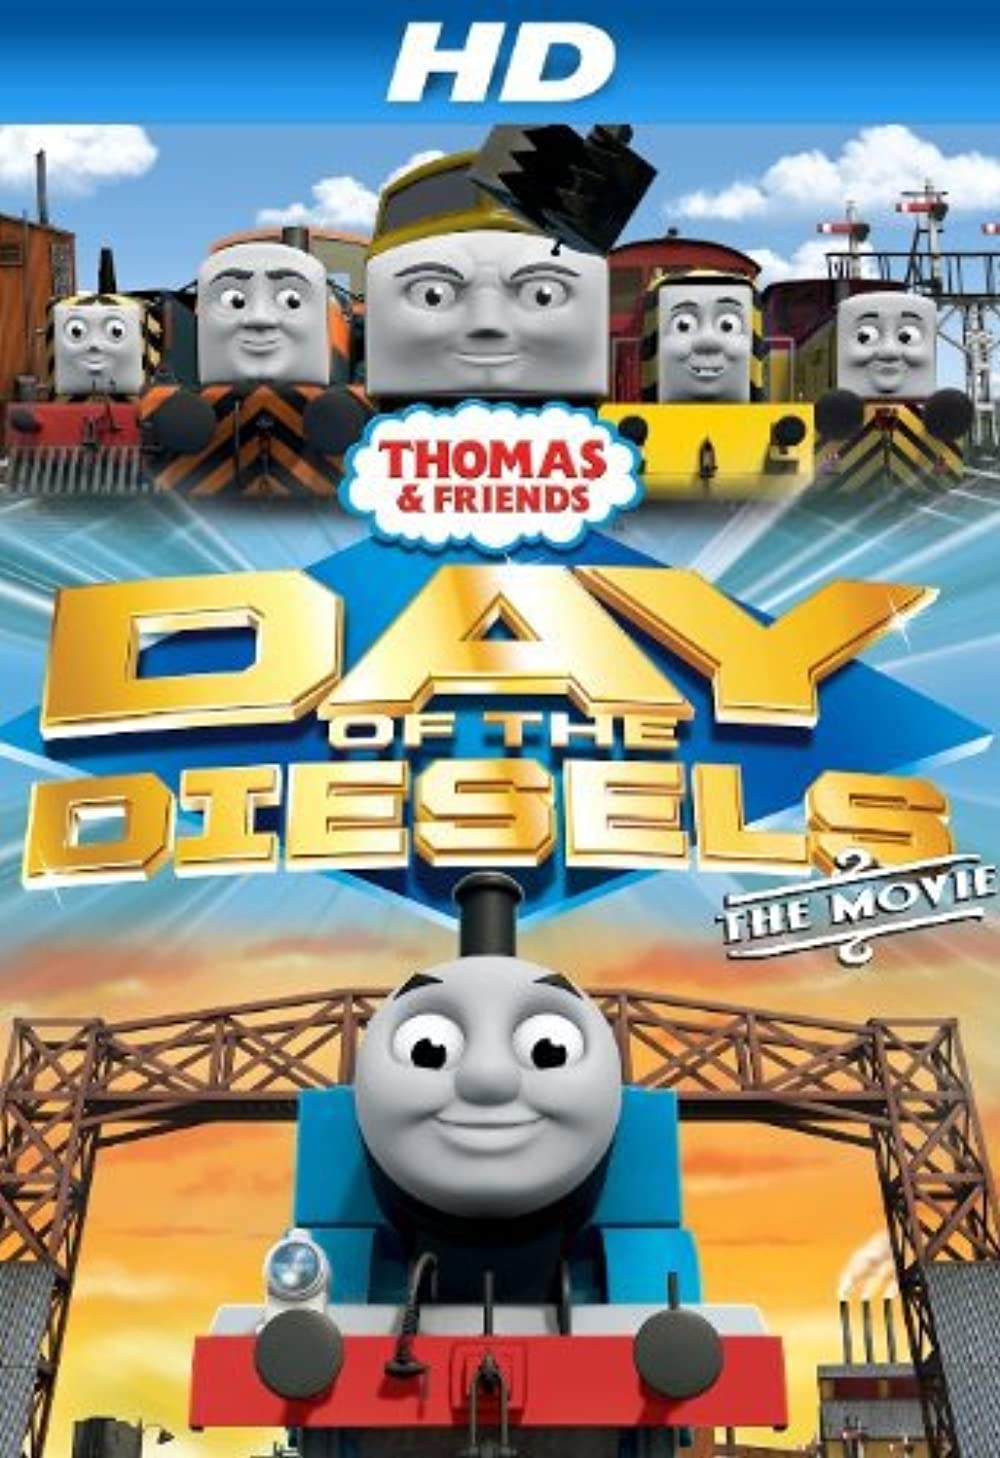 Download Thomas & Friends: Day of the Diesels Movie | Thomas & Friends: Day Of The Diesels